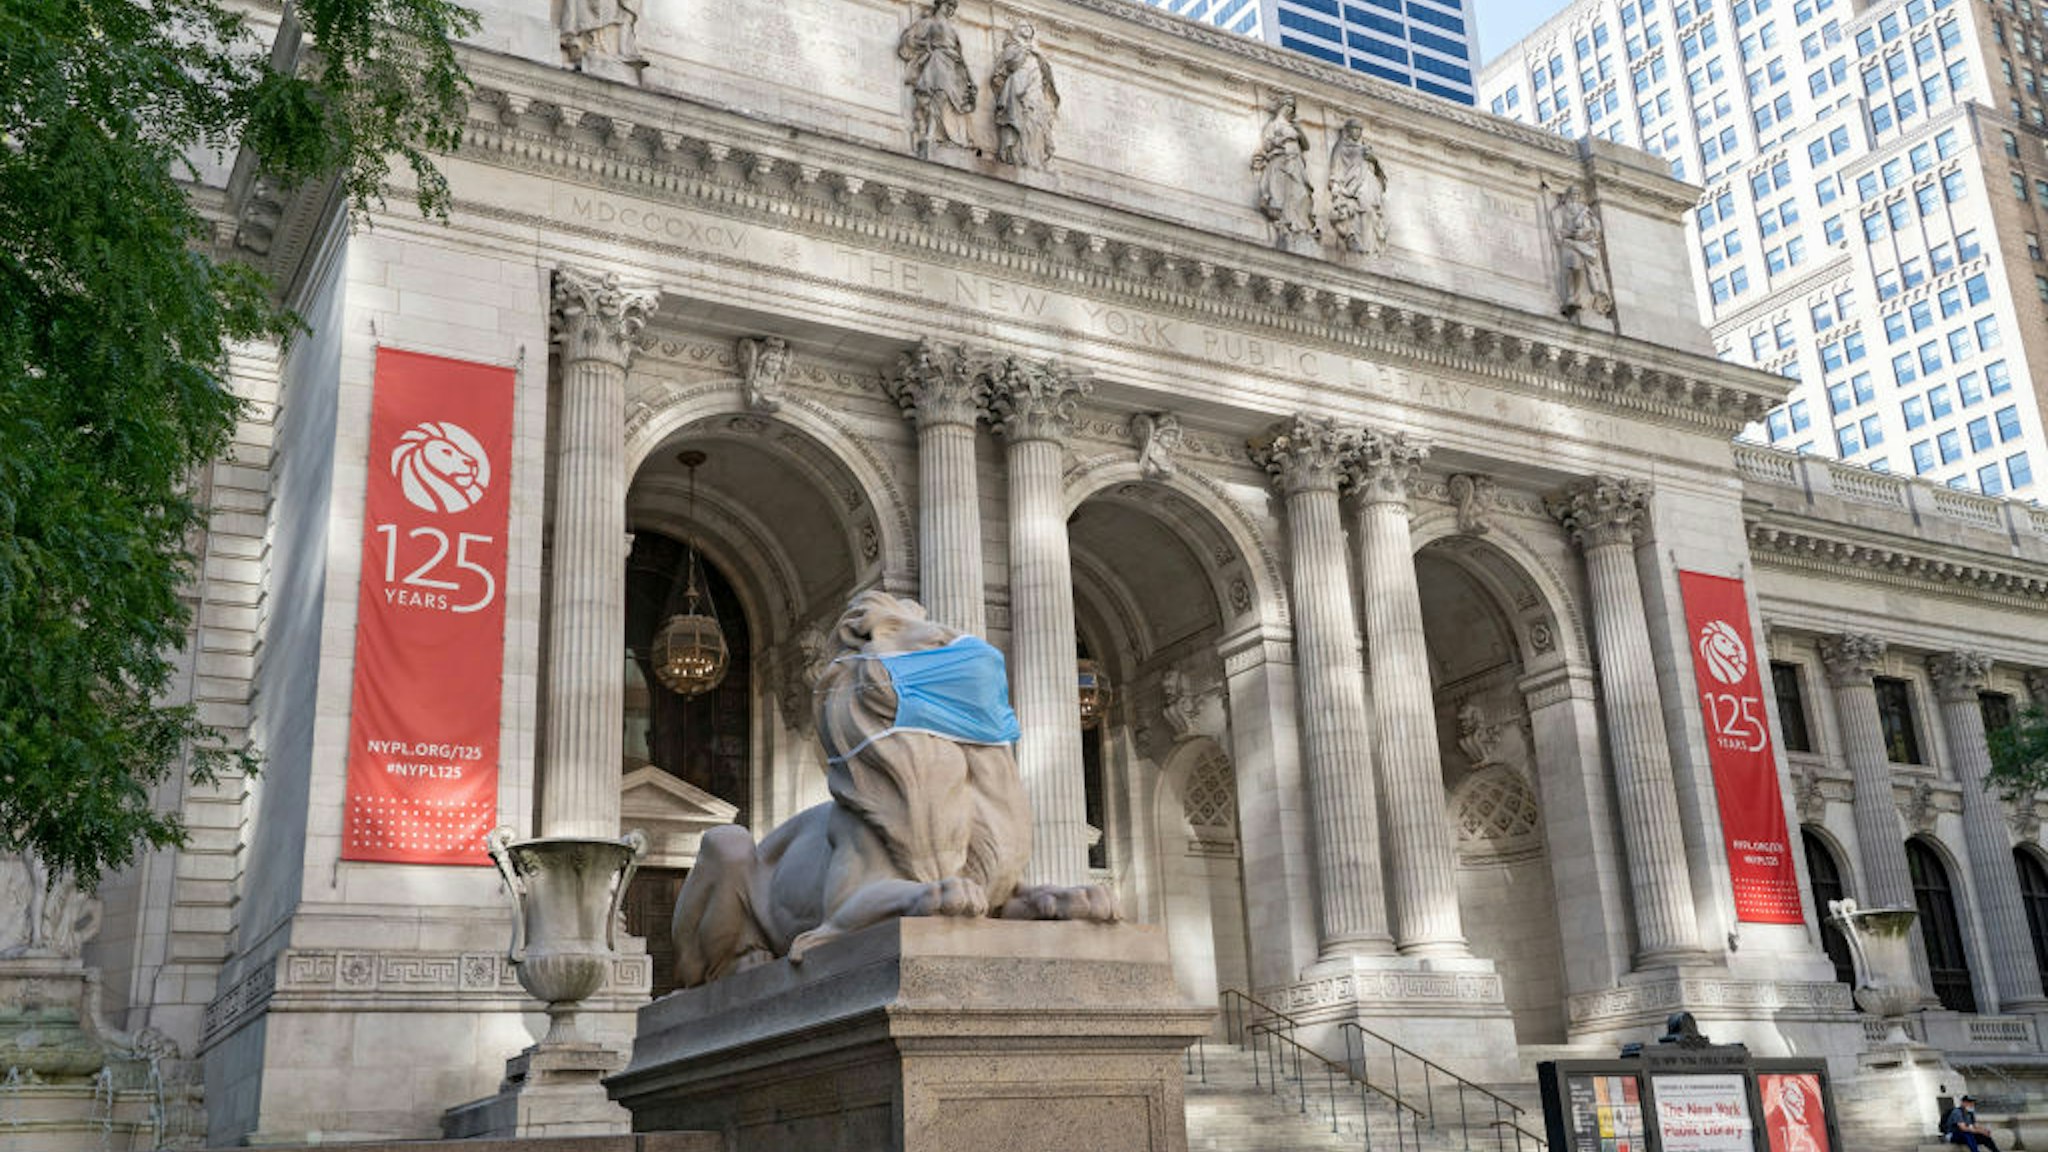 NEW YORK, UNITED STATES - 2020/07/13: An exterior view of New York Public Library on Fifth Ave in New York. The New York Public Library's stone lions Patience and Fortitude have donned face masks to remind New Yorkers to wear face coverings during the COVID-19 pandemic. (Photo by Ron Adar/SOPA Images/LightRocket via Getty Images)